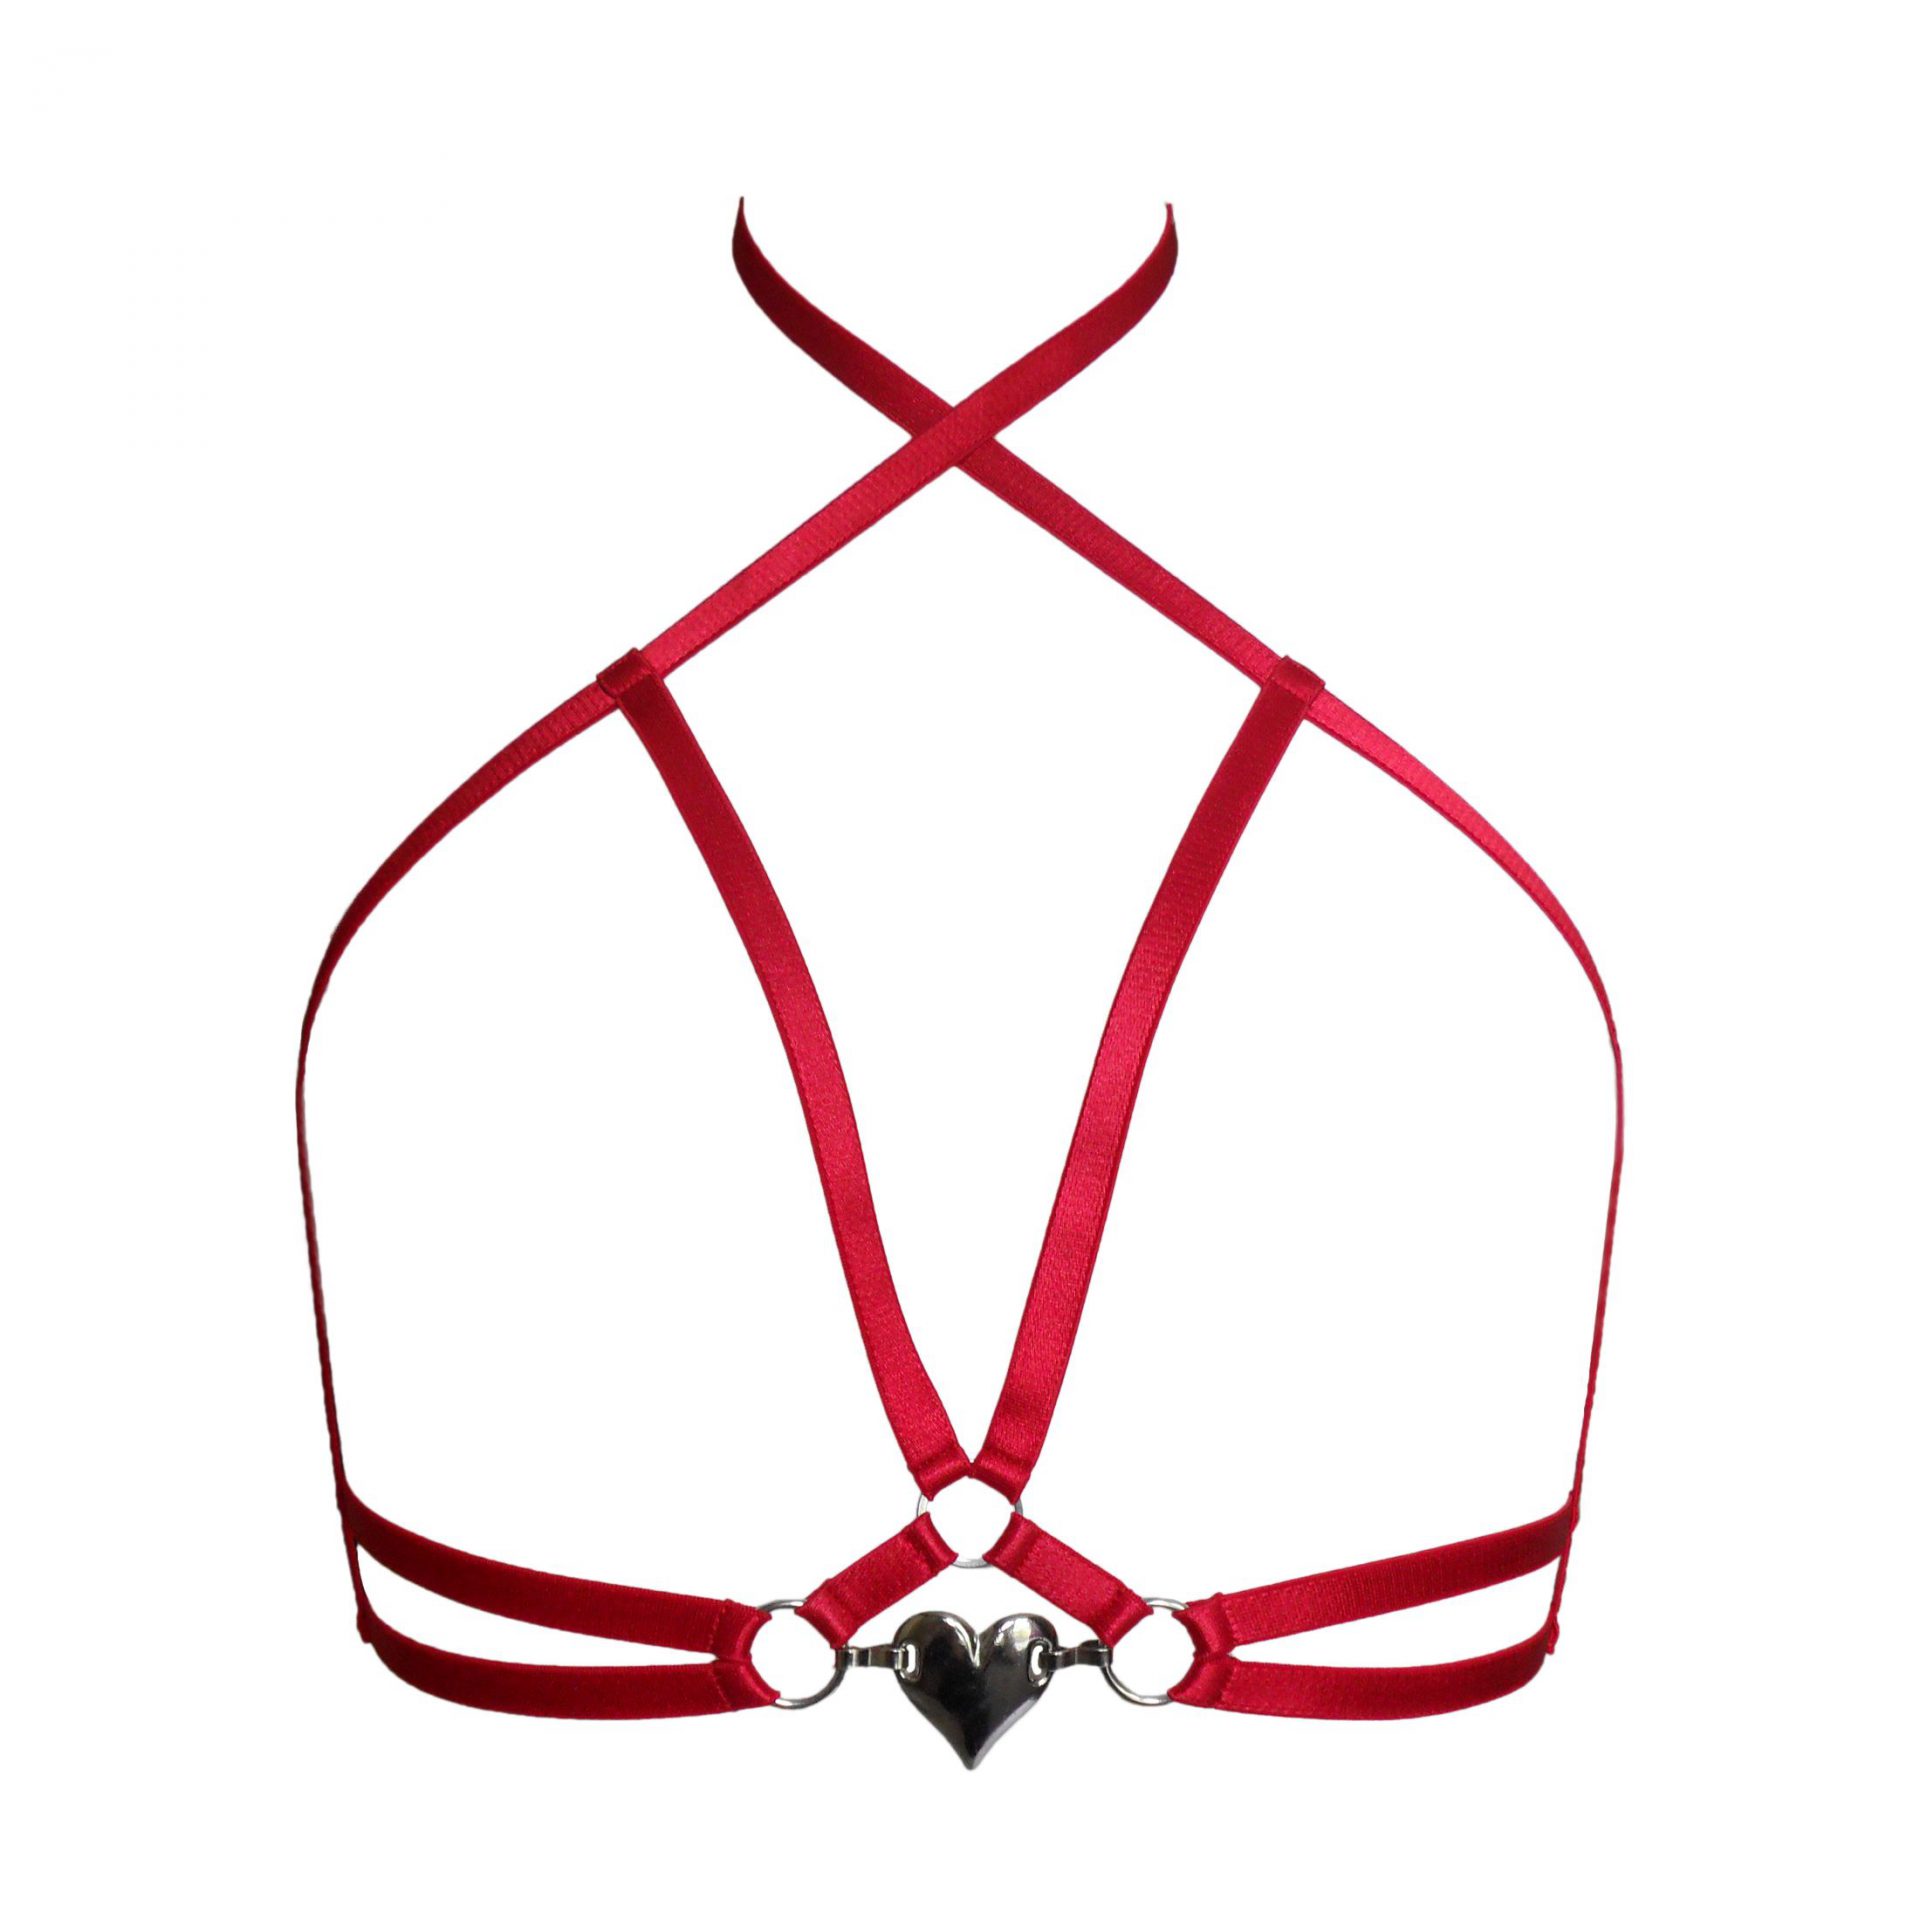 Red satin elastic harness bra with silver metal heart